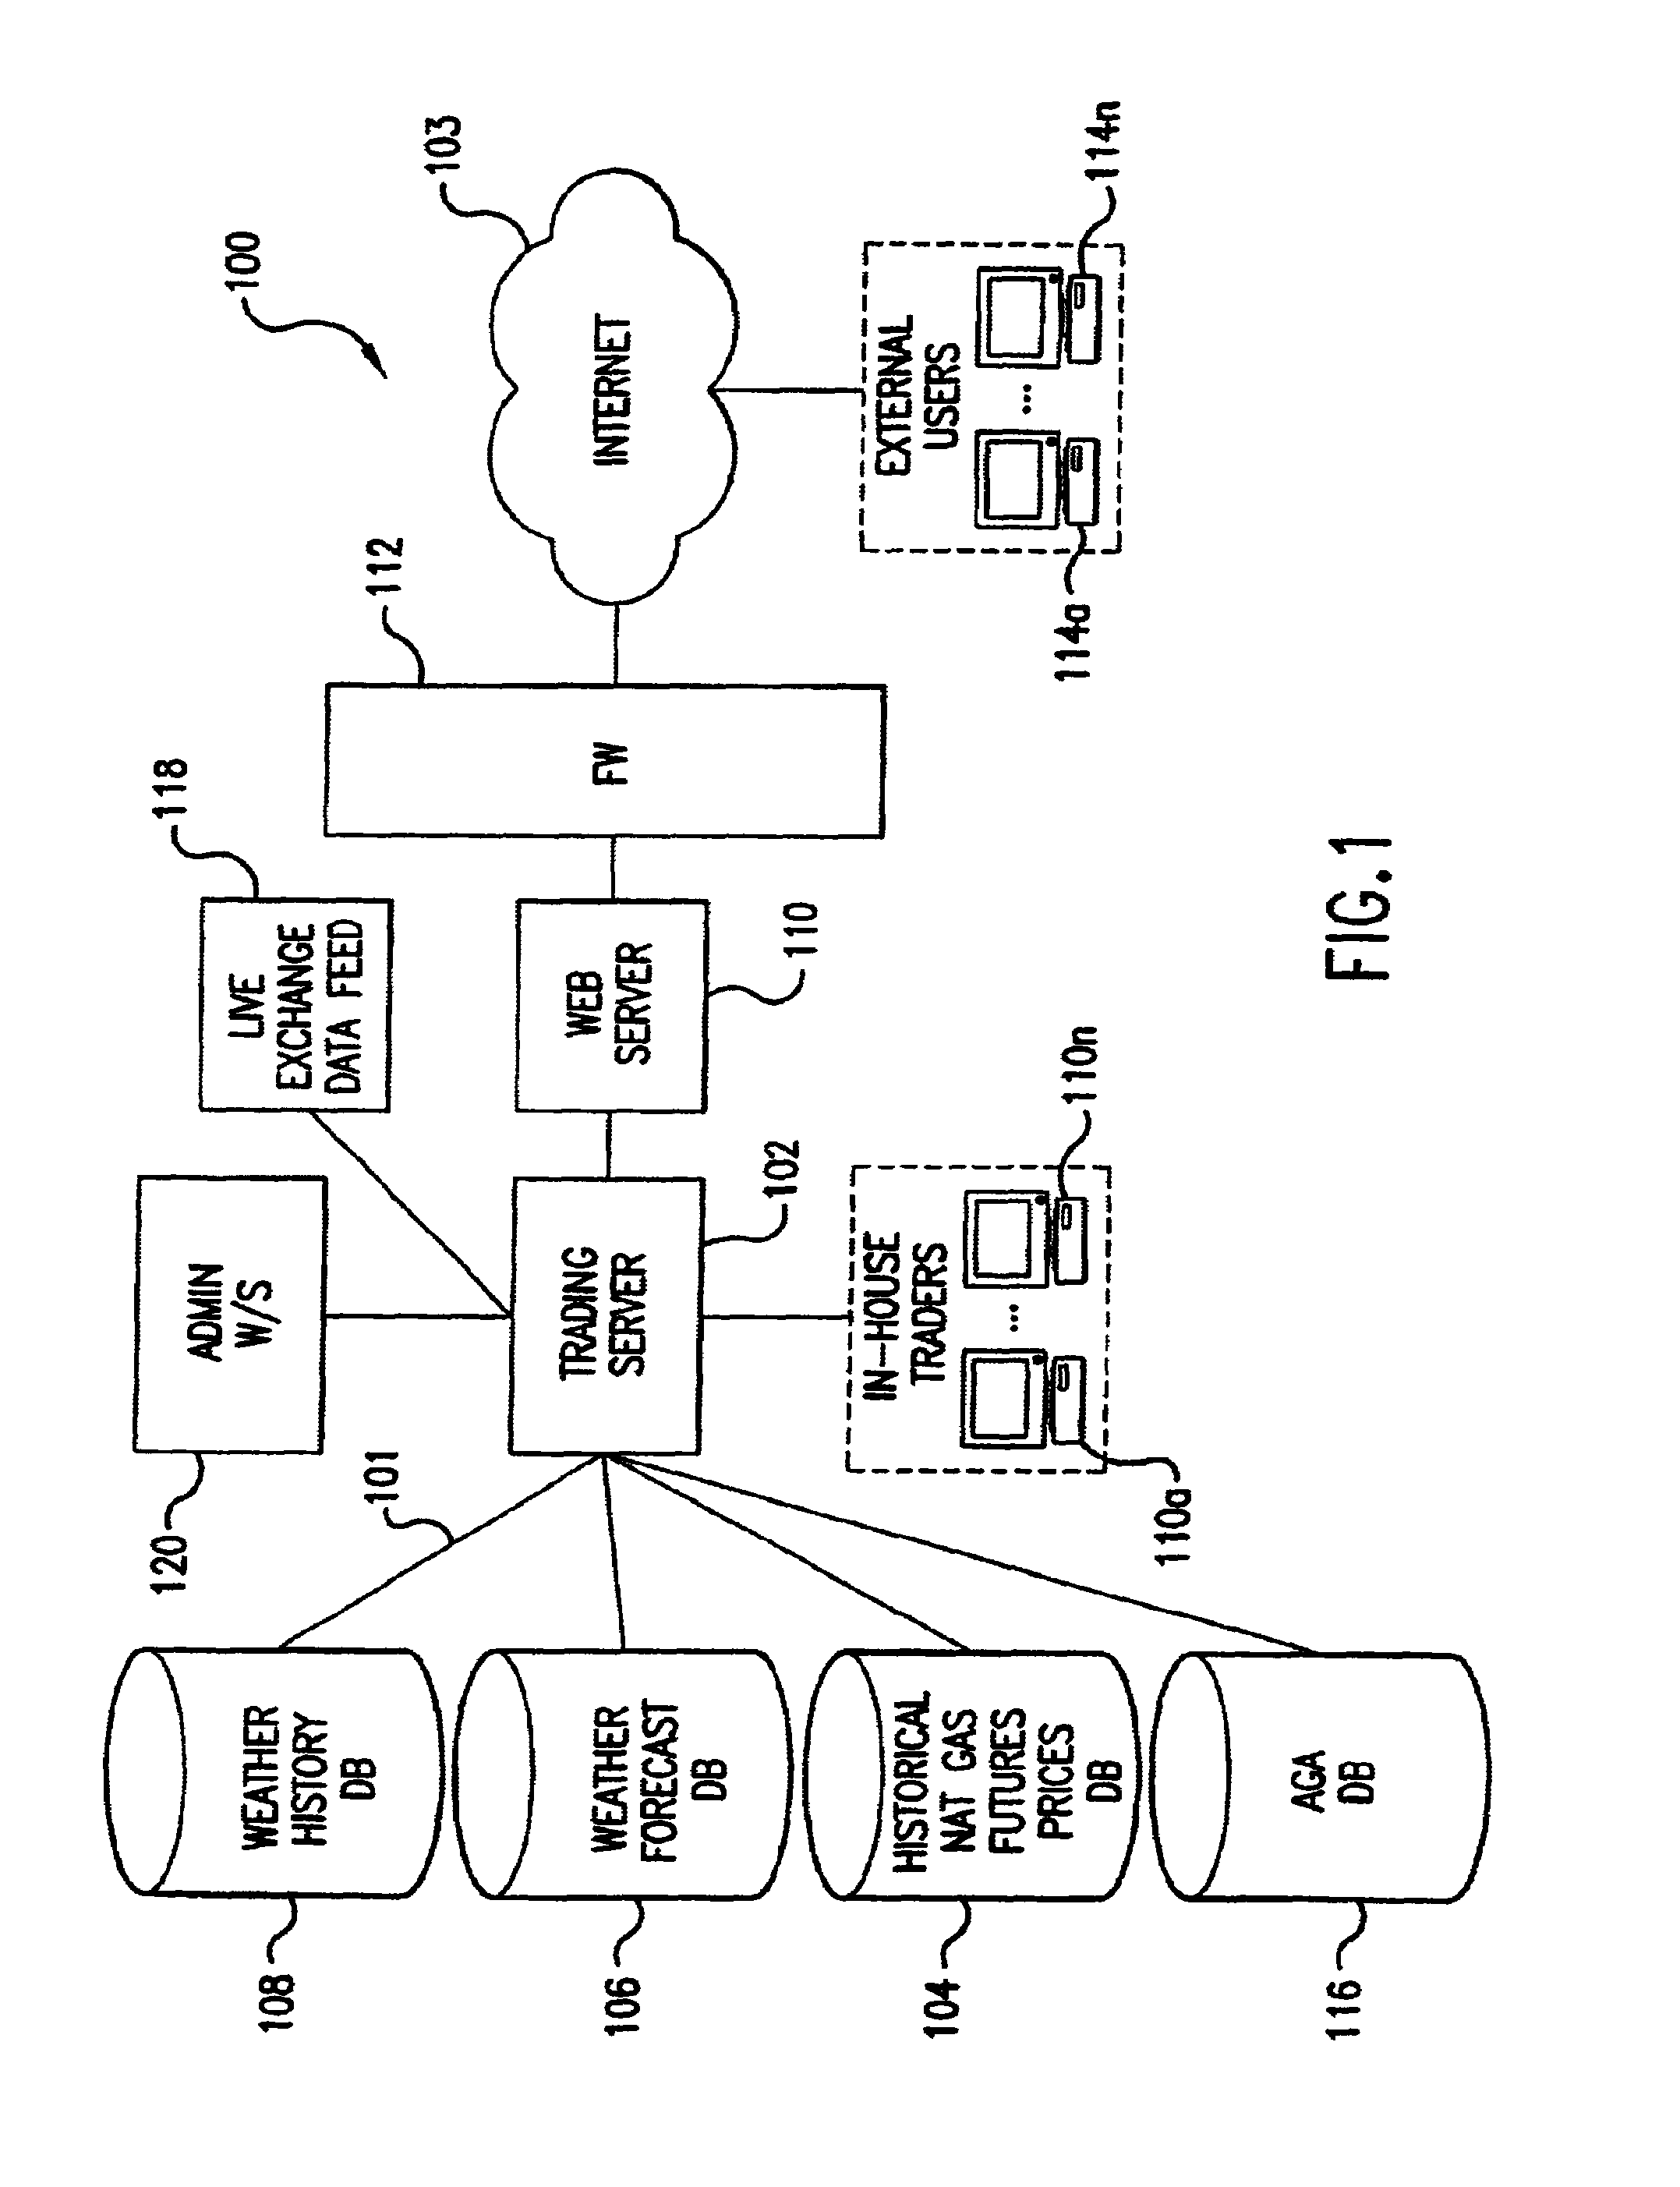 Method, system and computer program product for valuating natural gas contracts using weather-based metrics